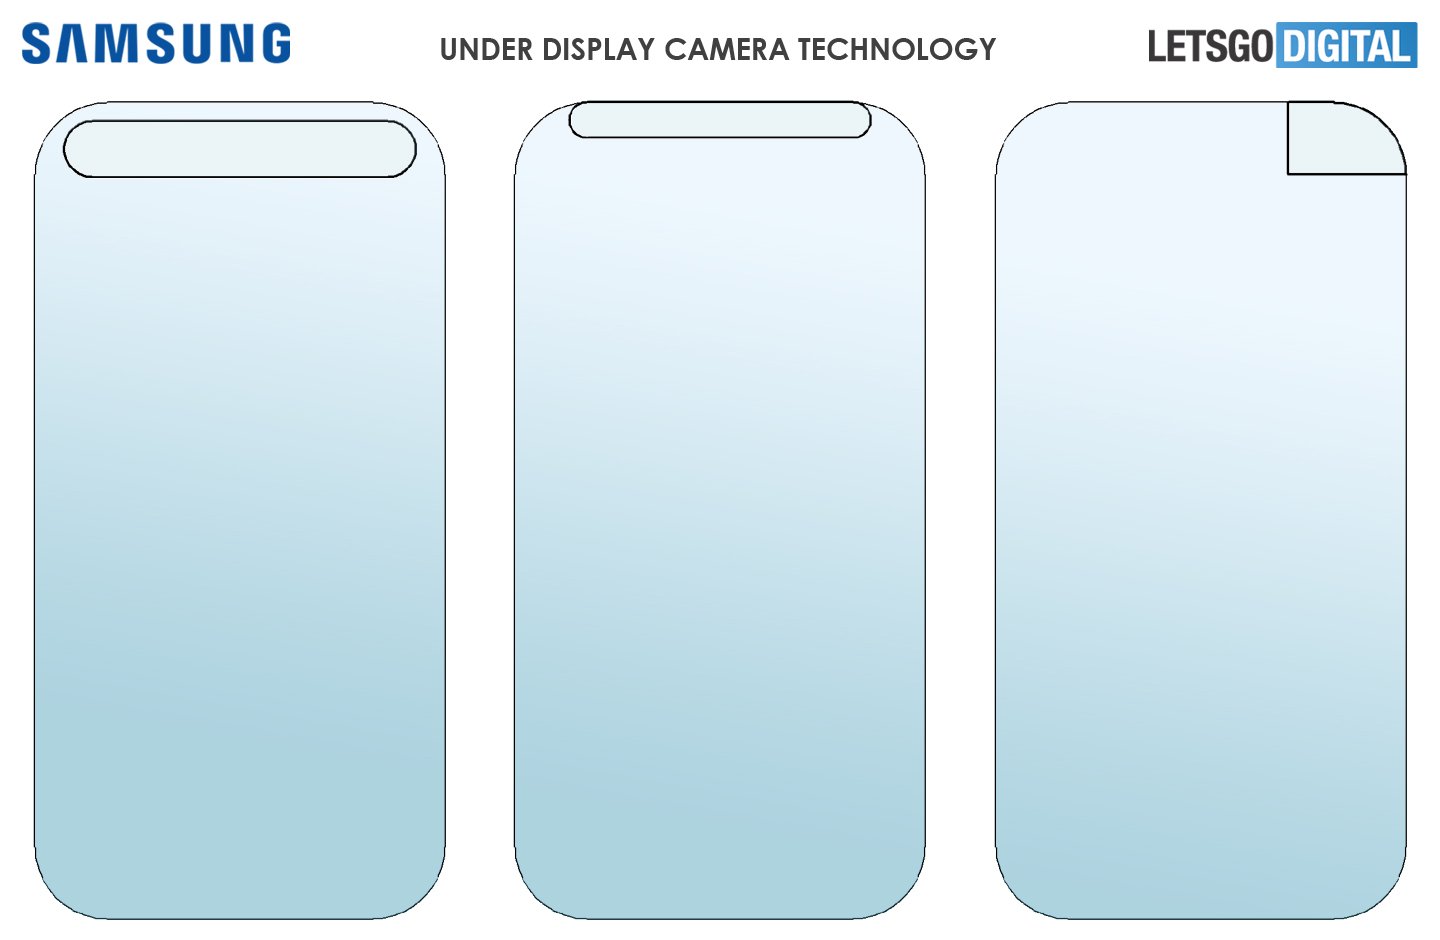 Samsung patents an under display camera solution